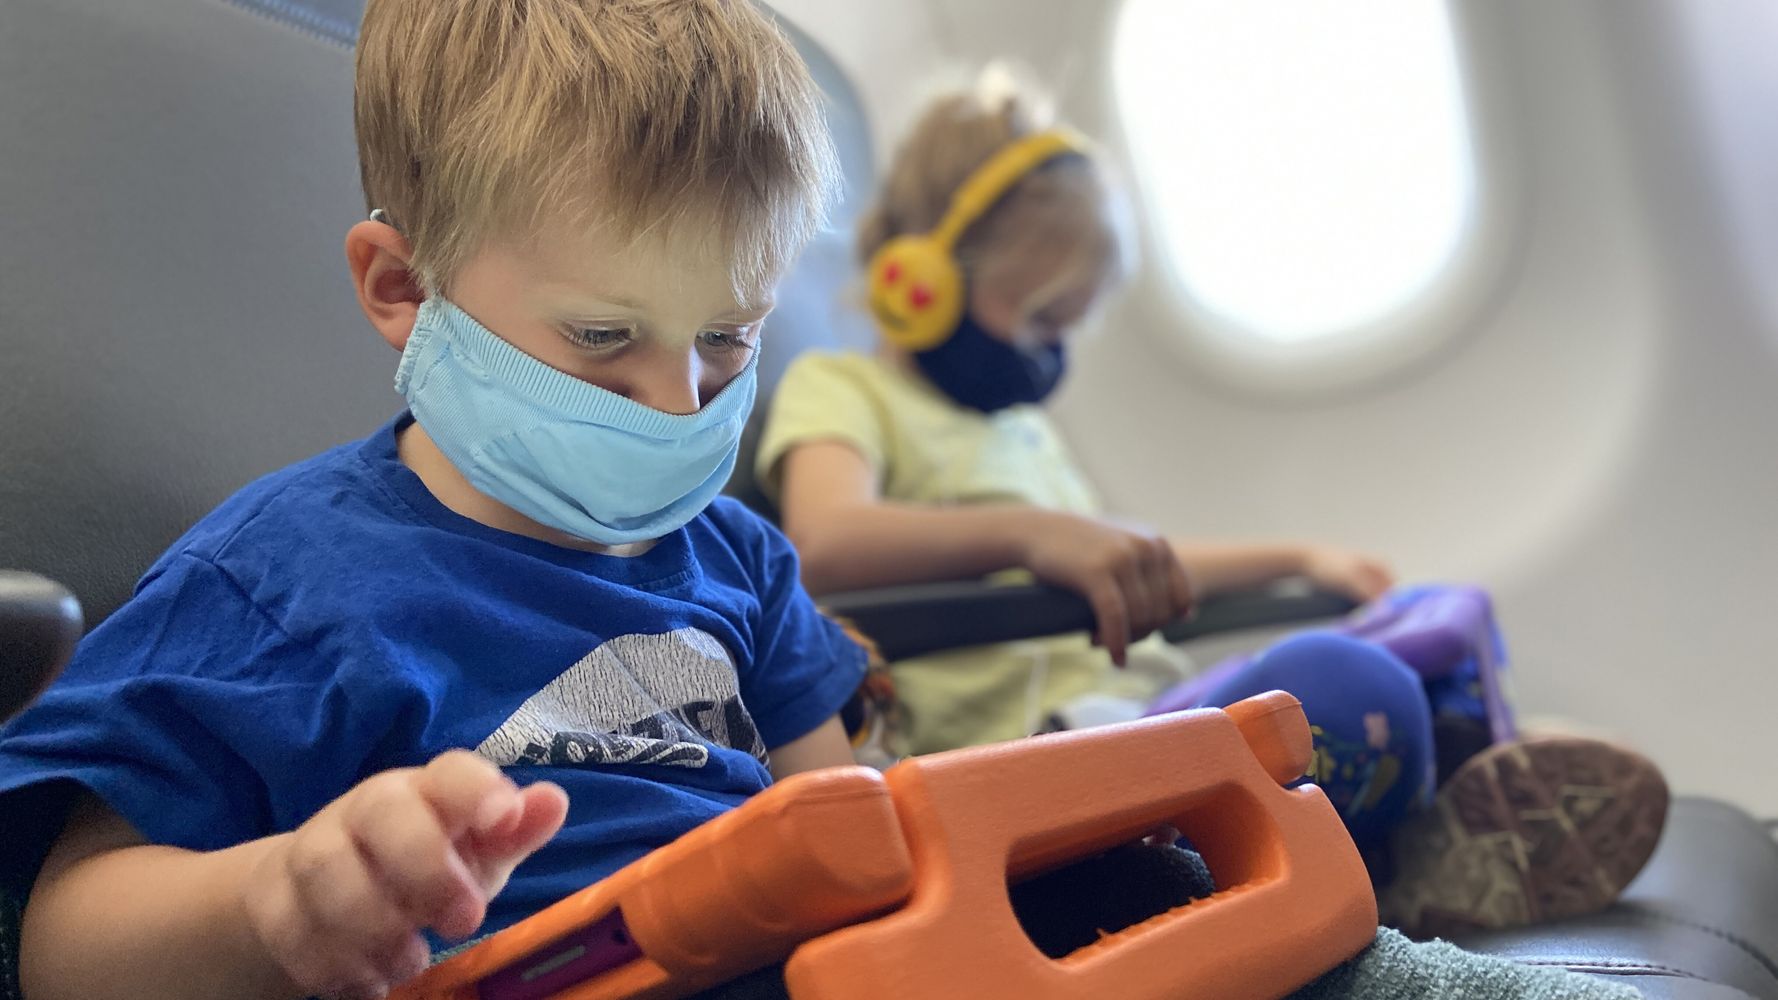 How to Entertain a 2 Year Old on a Plane + Tips for Flying with a Toddler -  Speak. Play. Love.